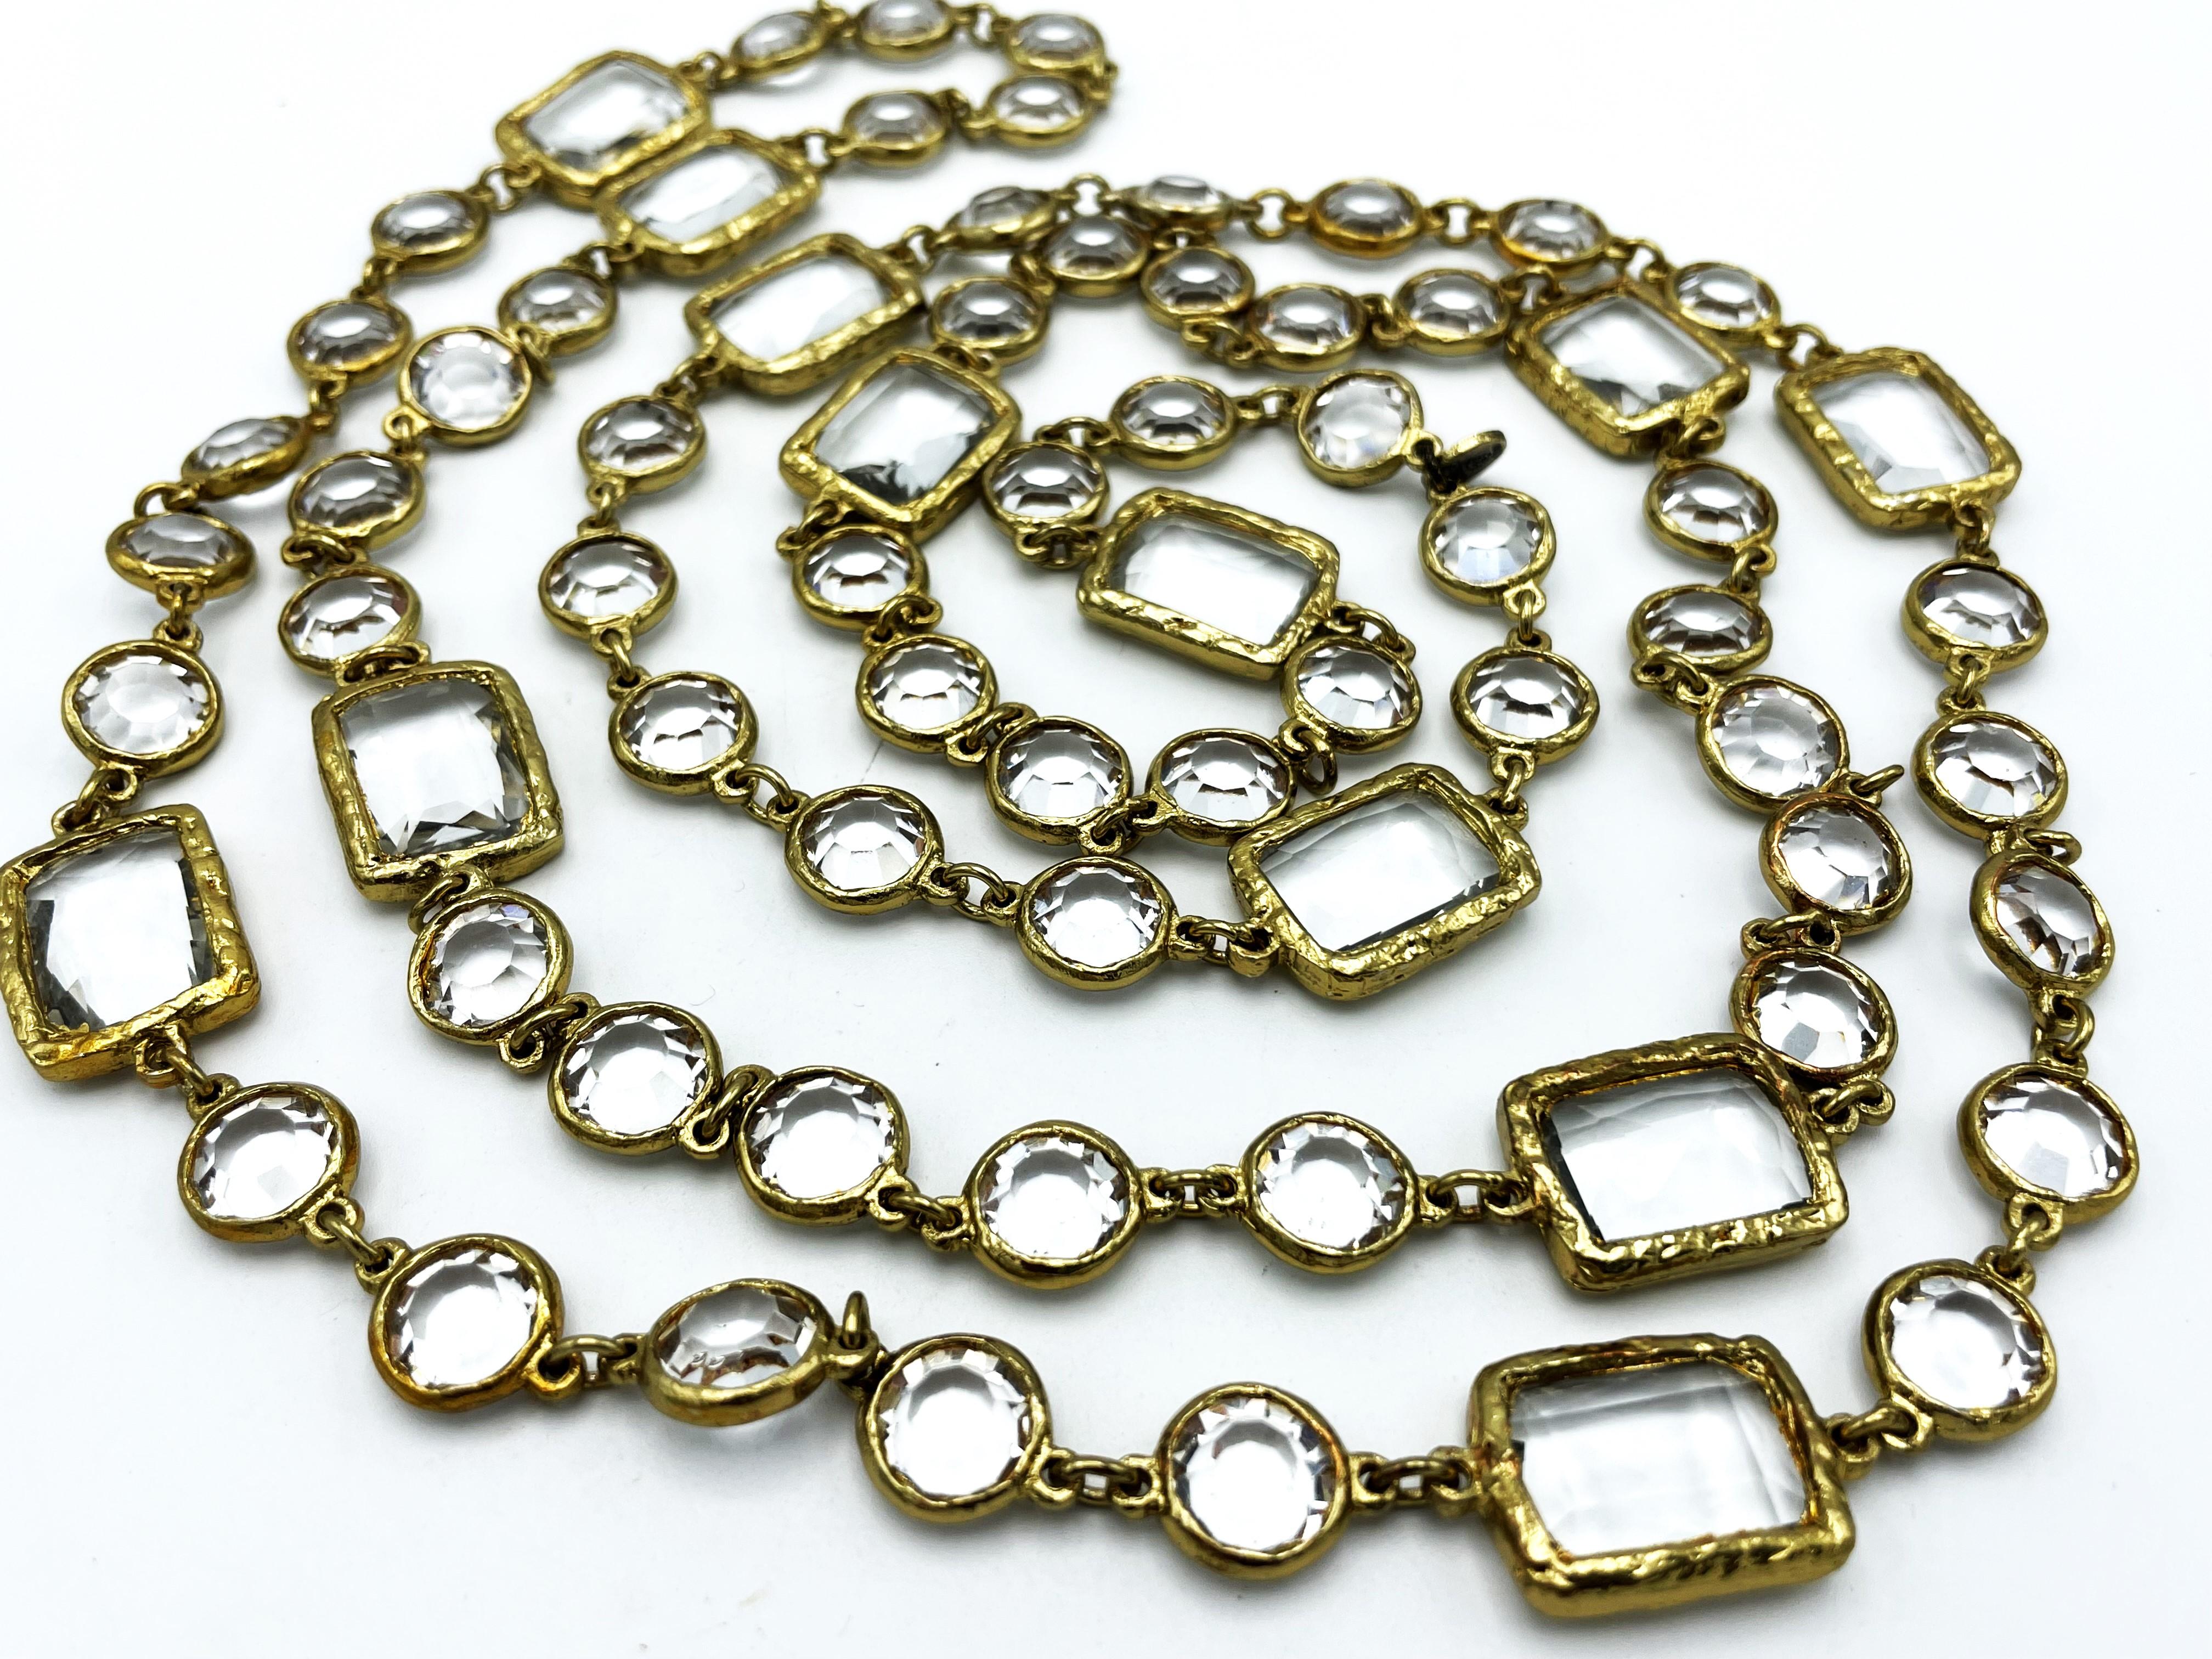 Vintage CHANEL Necklace/Sautoir with 12 clear Chicklets, signed 1981, gold plate 7